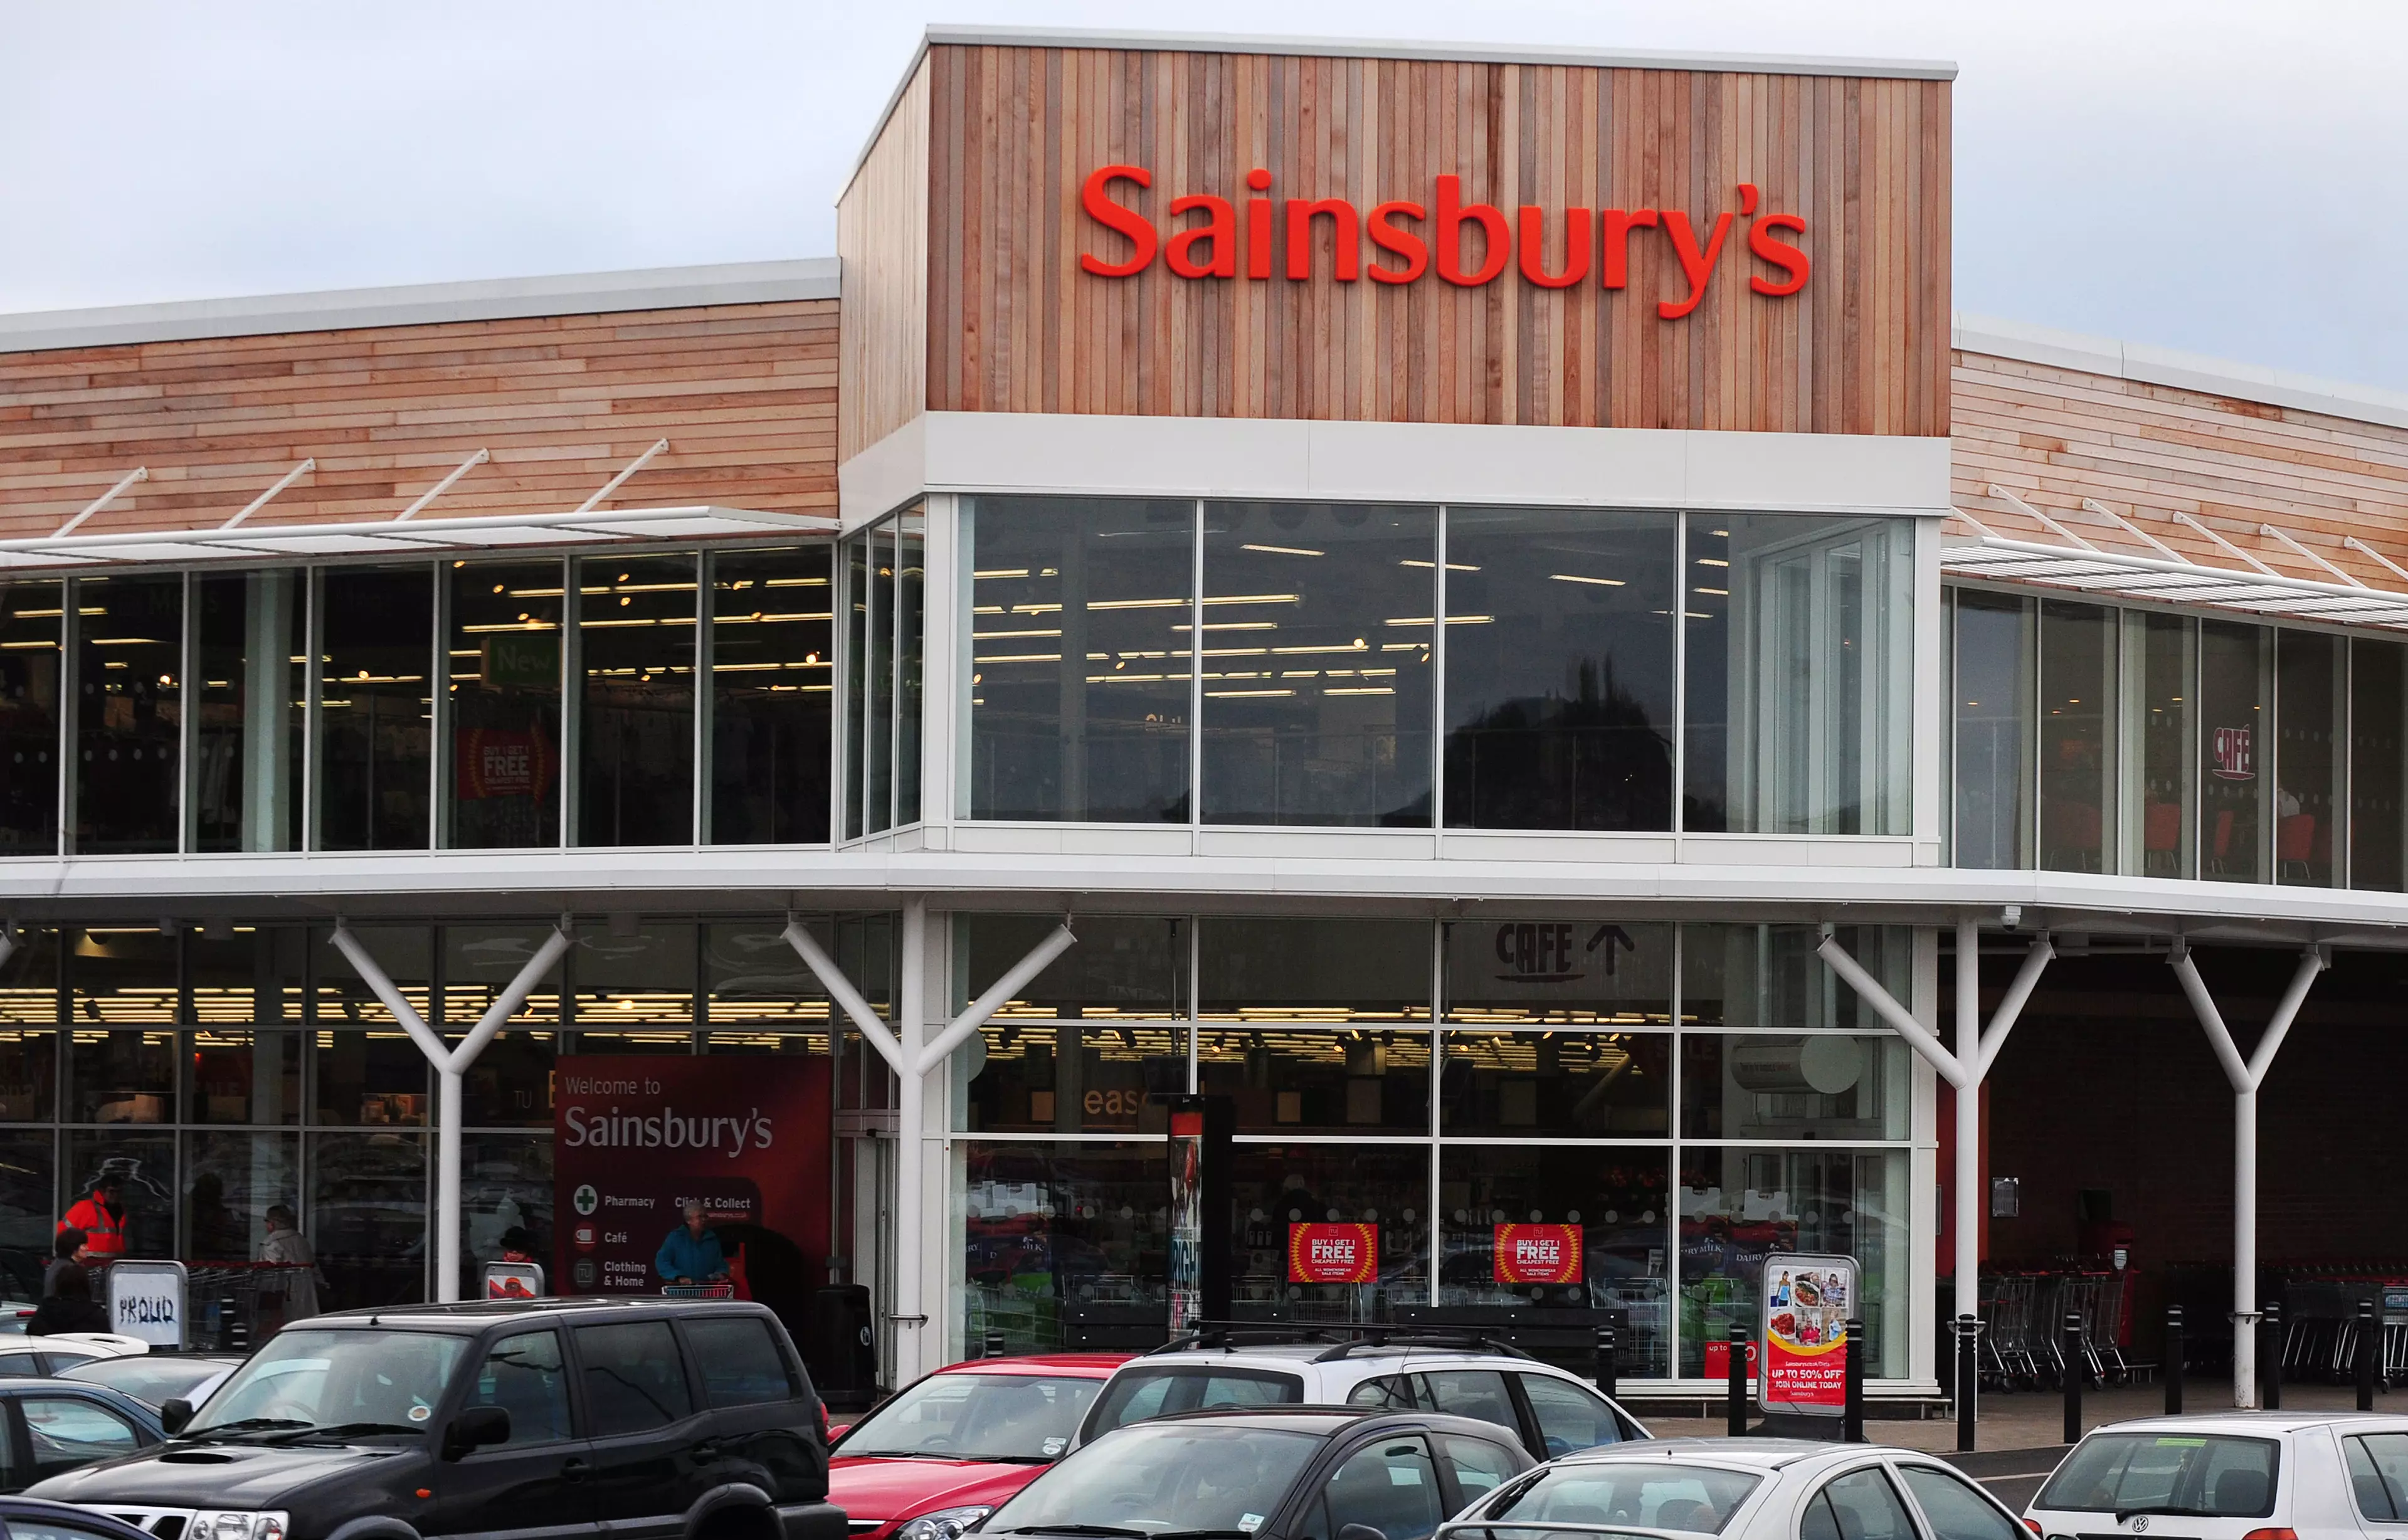 Sainsbury's first piloted the scheme in February.